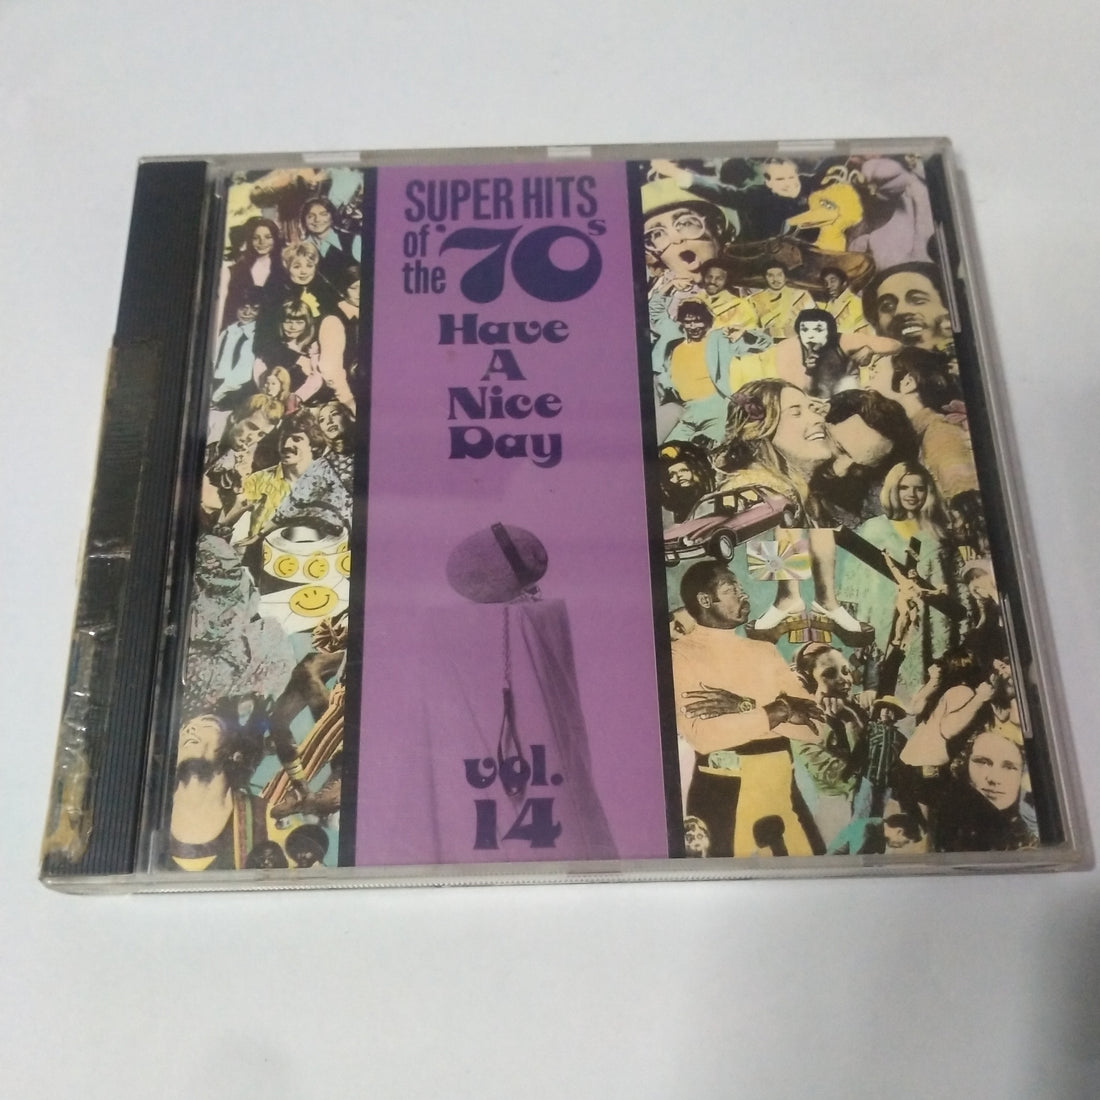 Various - Super Hits Of The '70s - Have A Nice Day, Vol. 14 (CD) (G+)